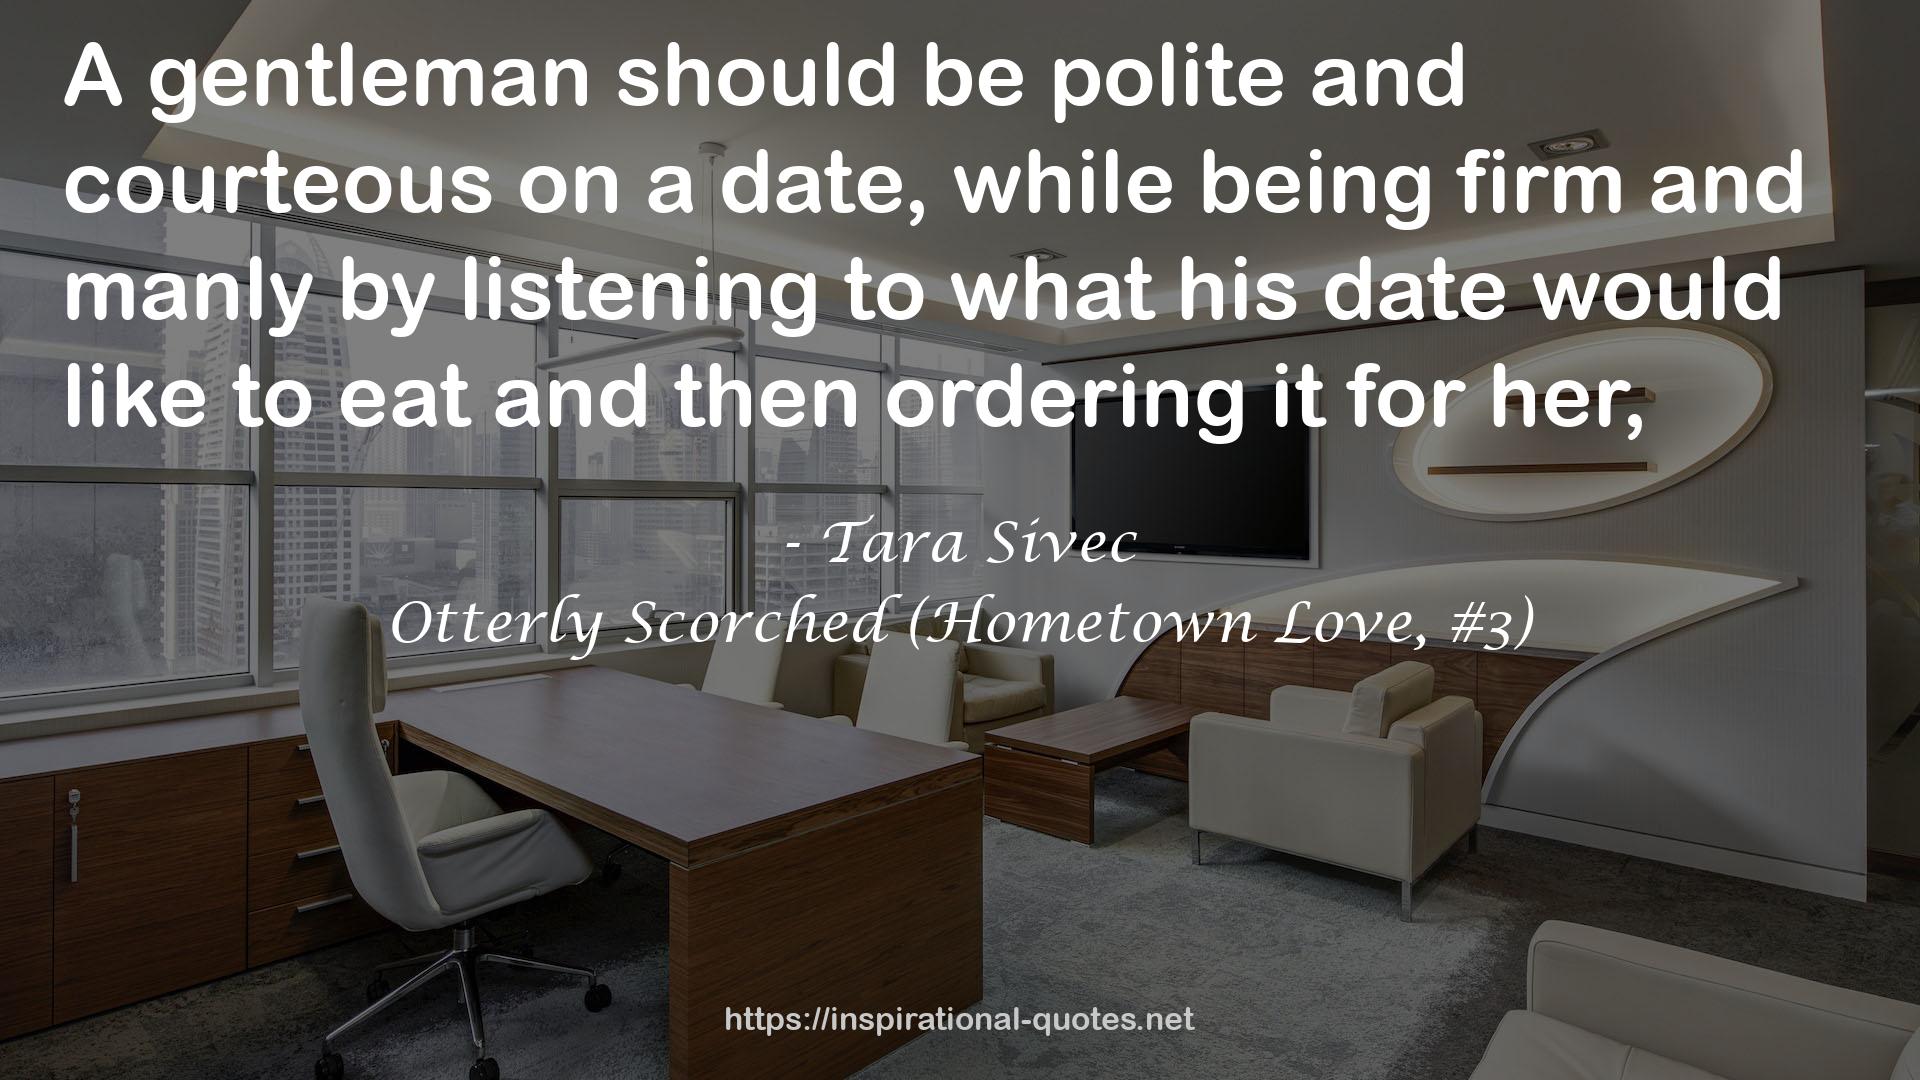 Otterly Scorched (Hometown Love, #3) QUOTES